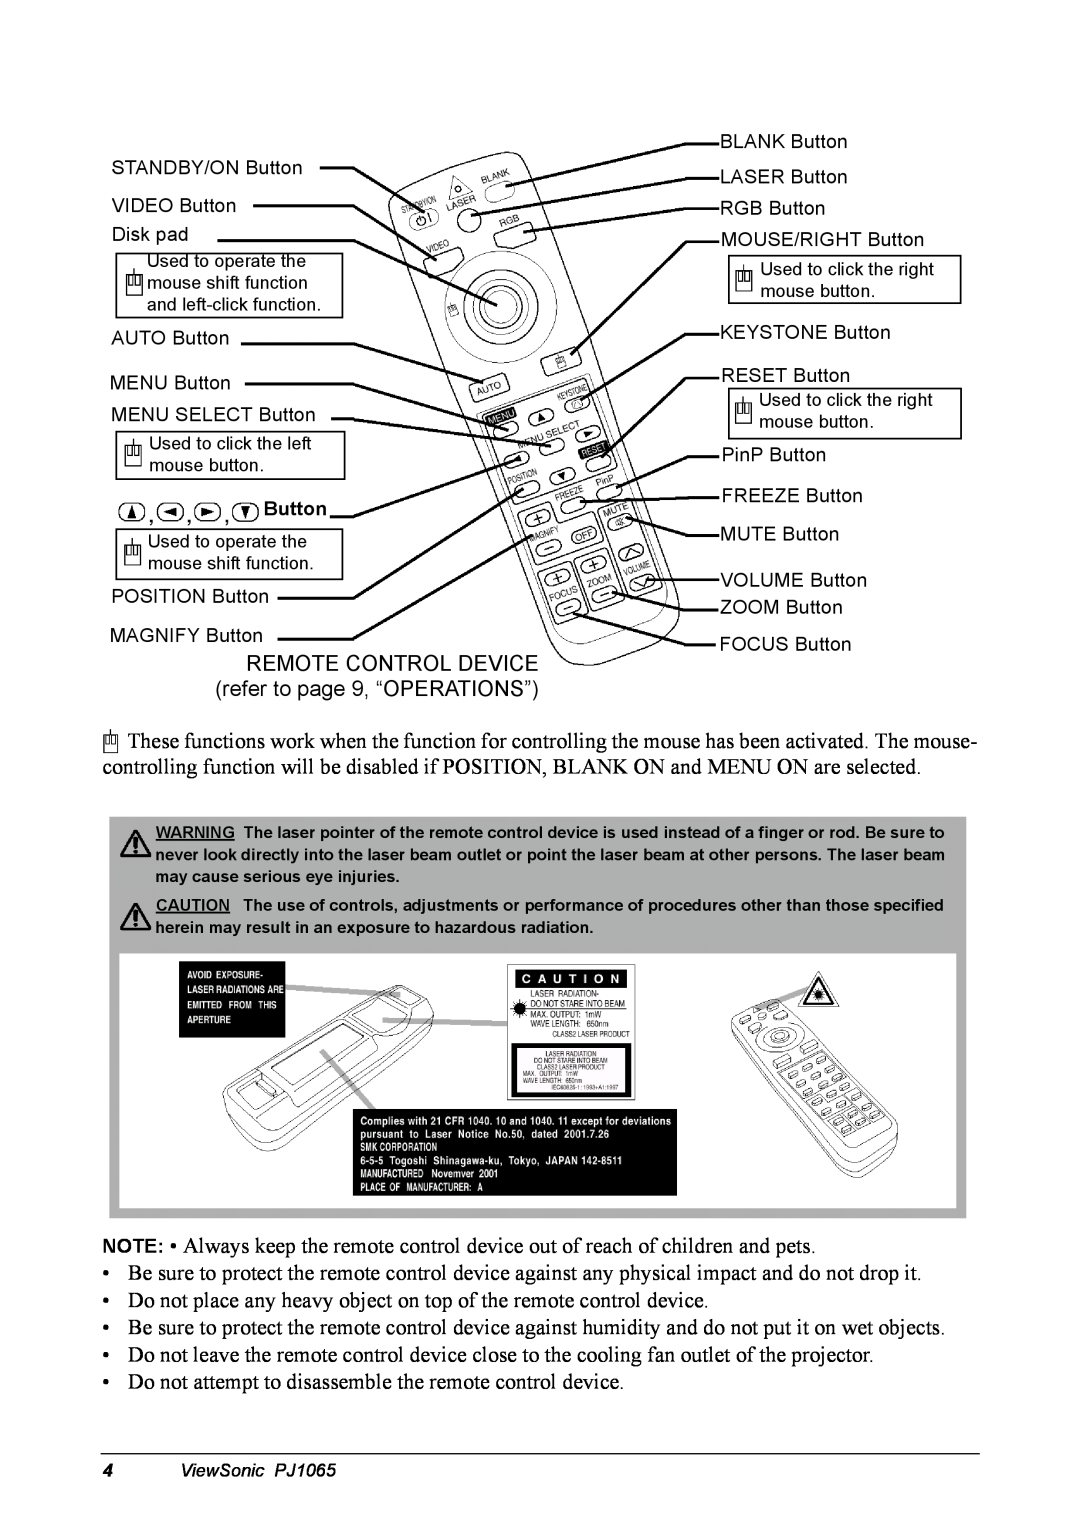 ViewSonic PJ1065 manual REMOTE CONTROL DEVICE refer to page 9, “OPERATIONS” 